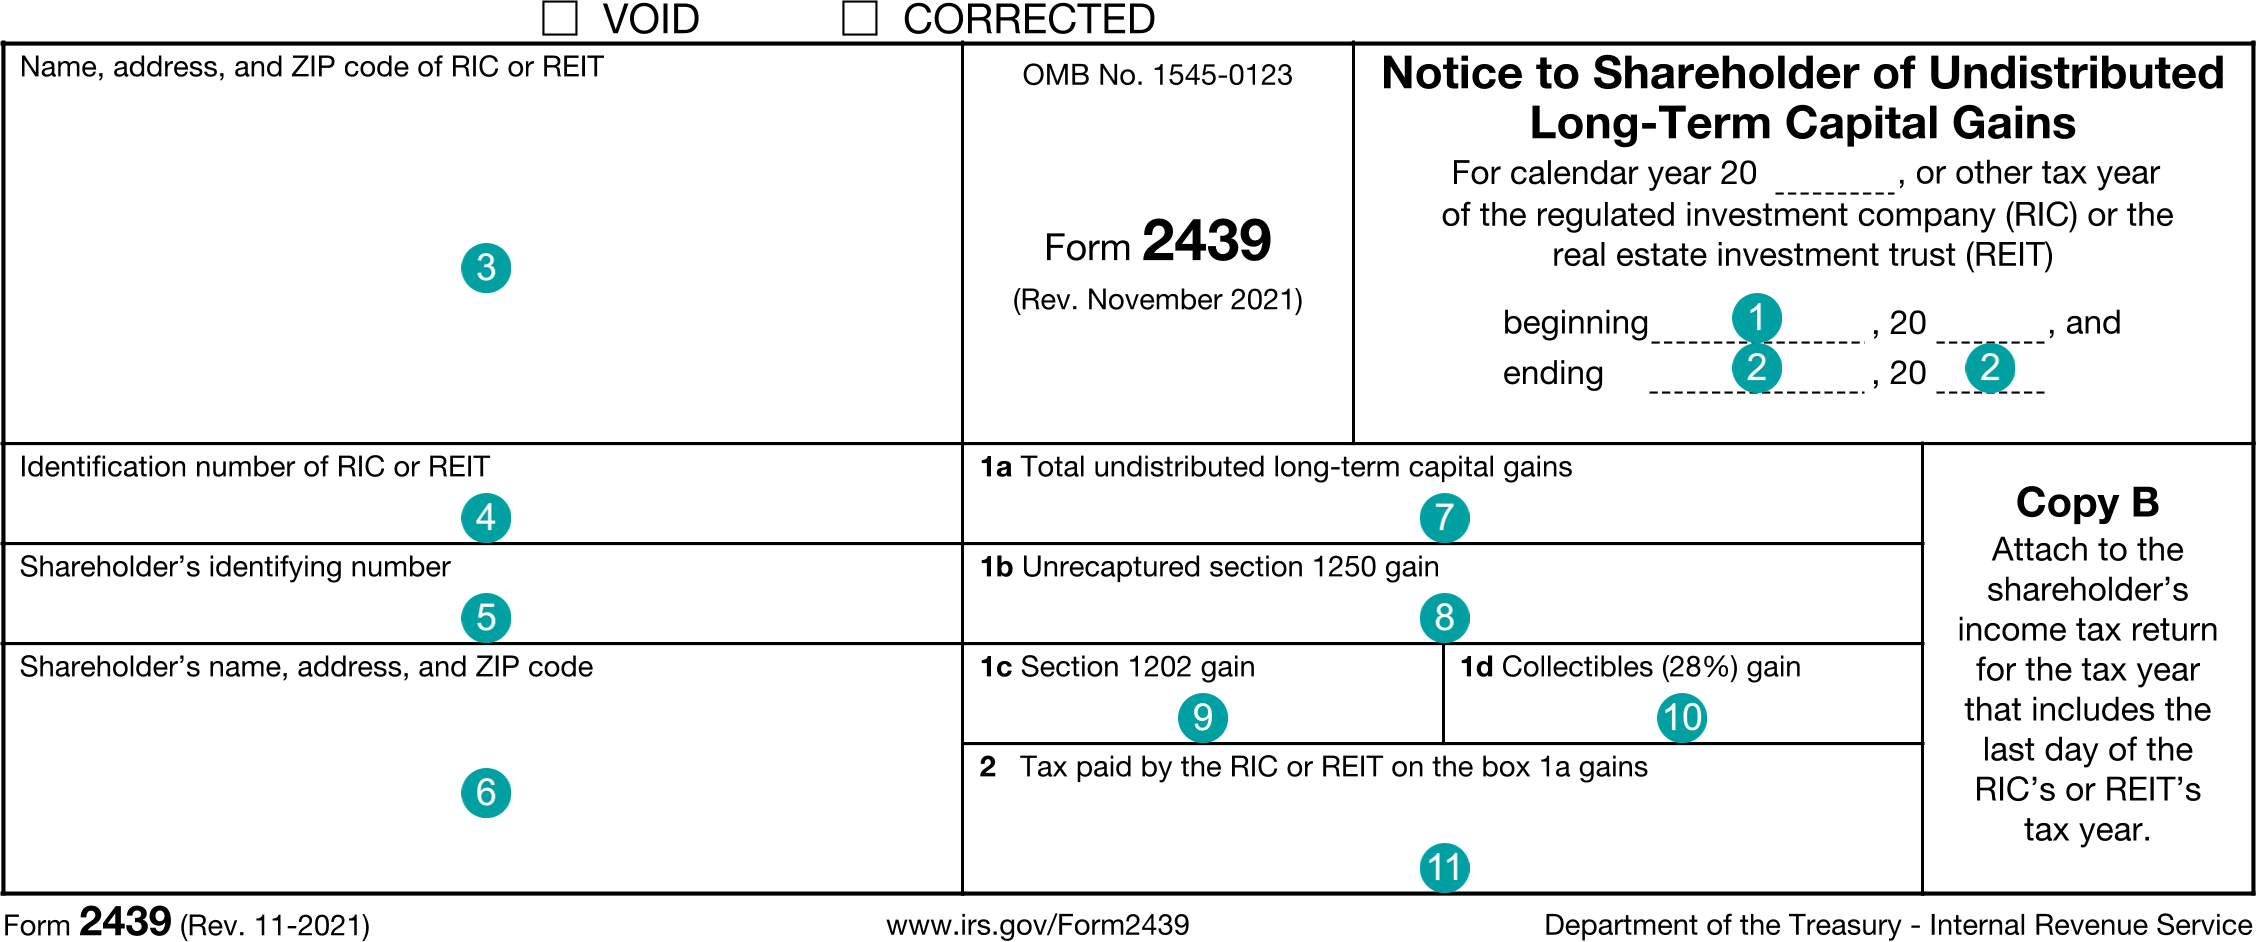 /img/forms/Tax2439/2022/v5.0/Tax2439.Recipient.Form.annotated.fdx.png